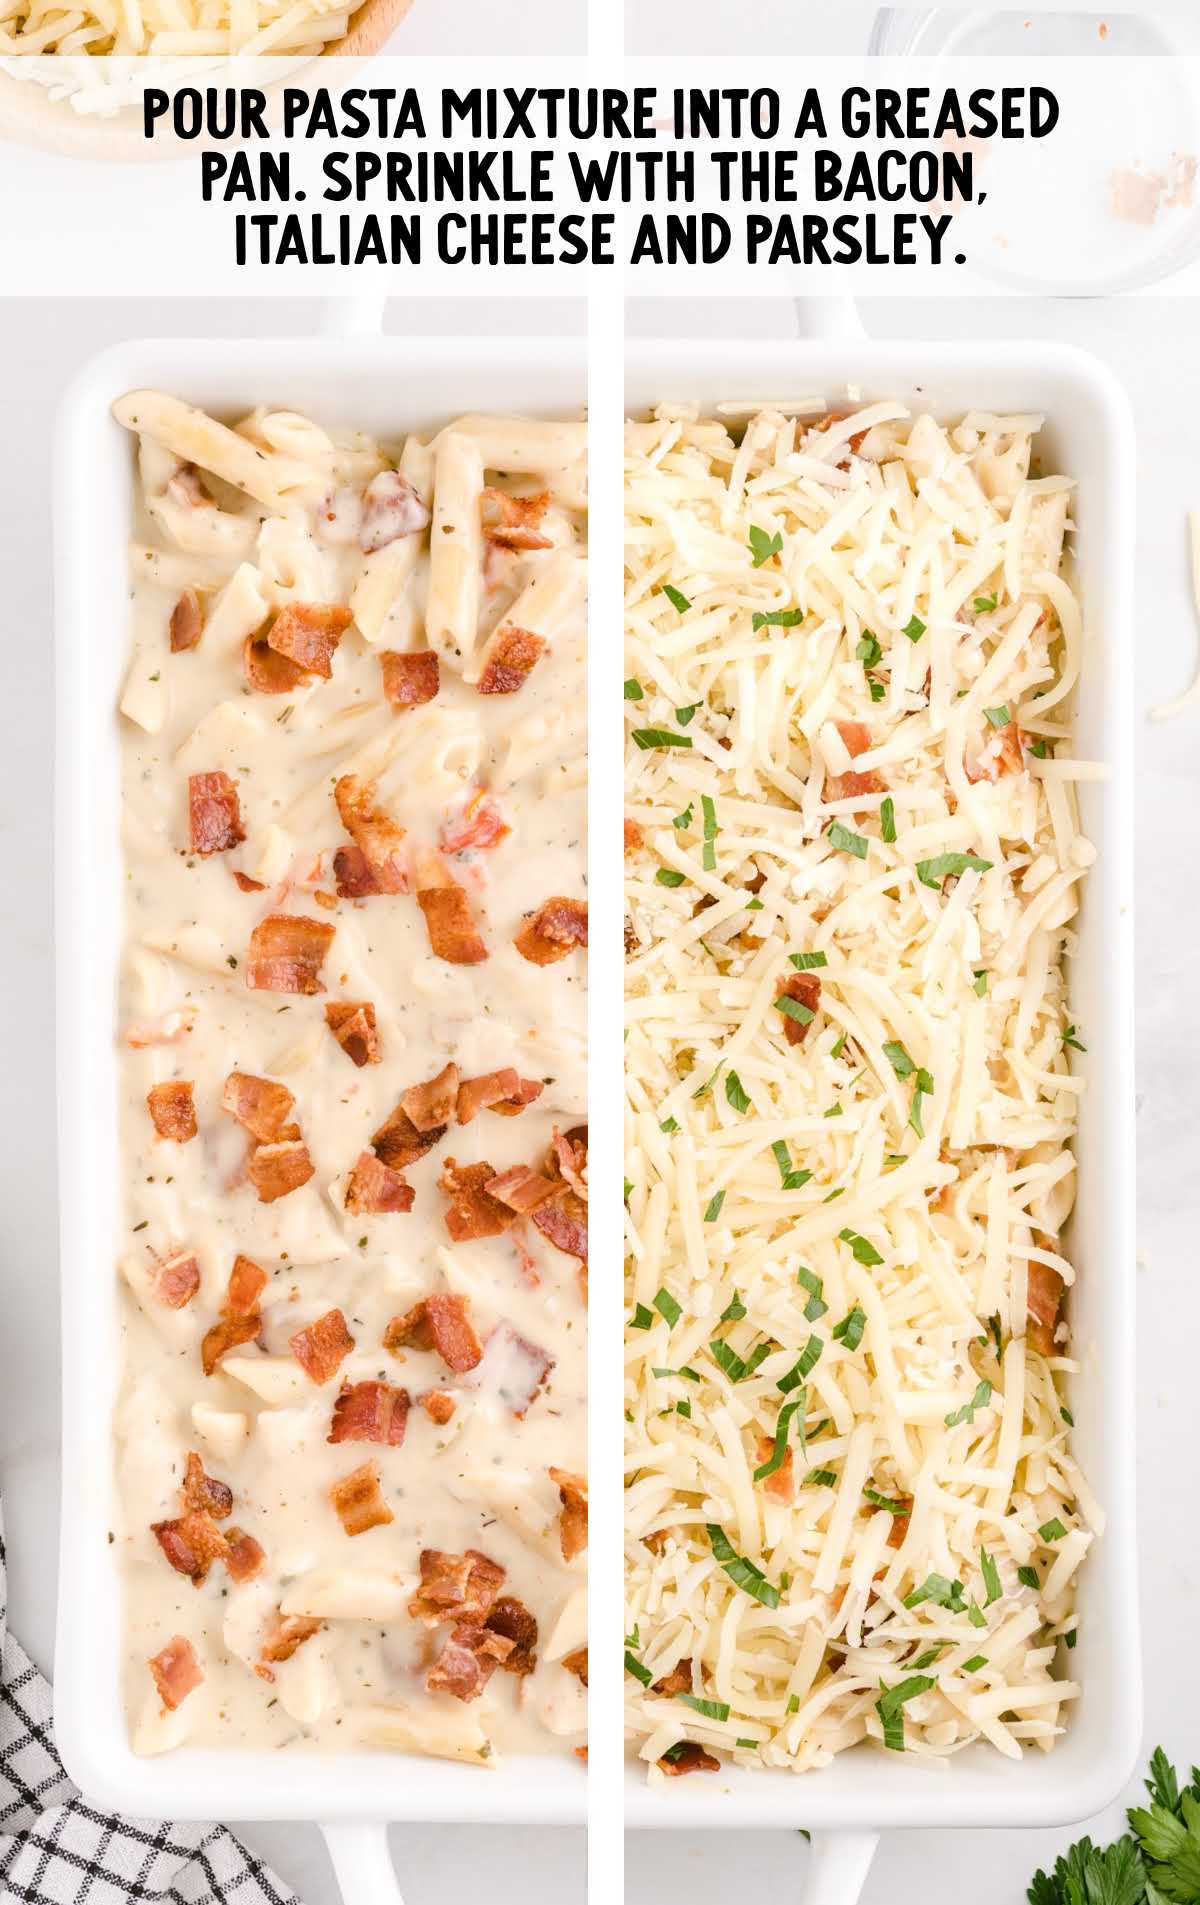 bacon, Italian cheese and parsley sprinkled on top of the pasta mixture in a baking dish